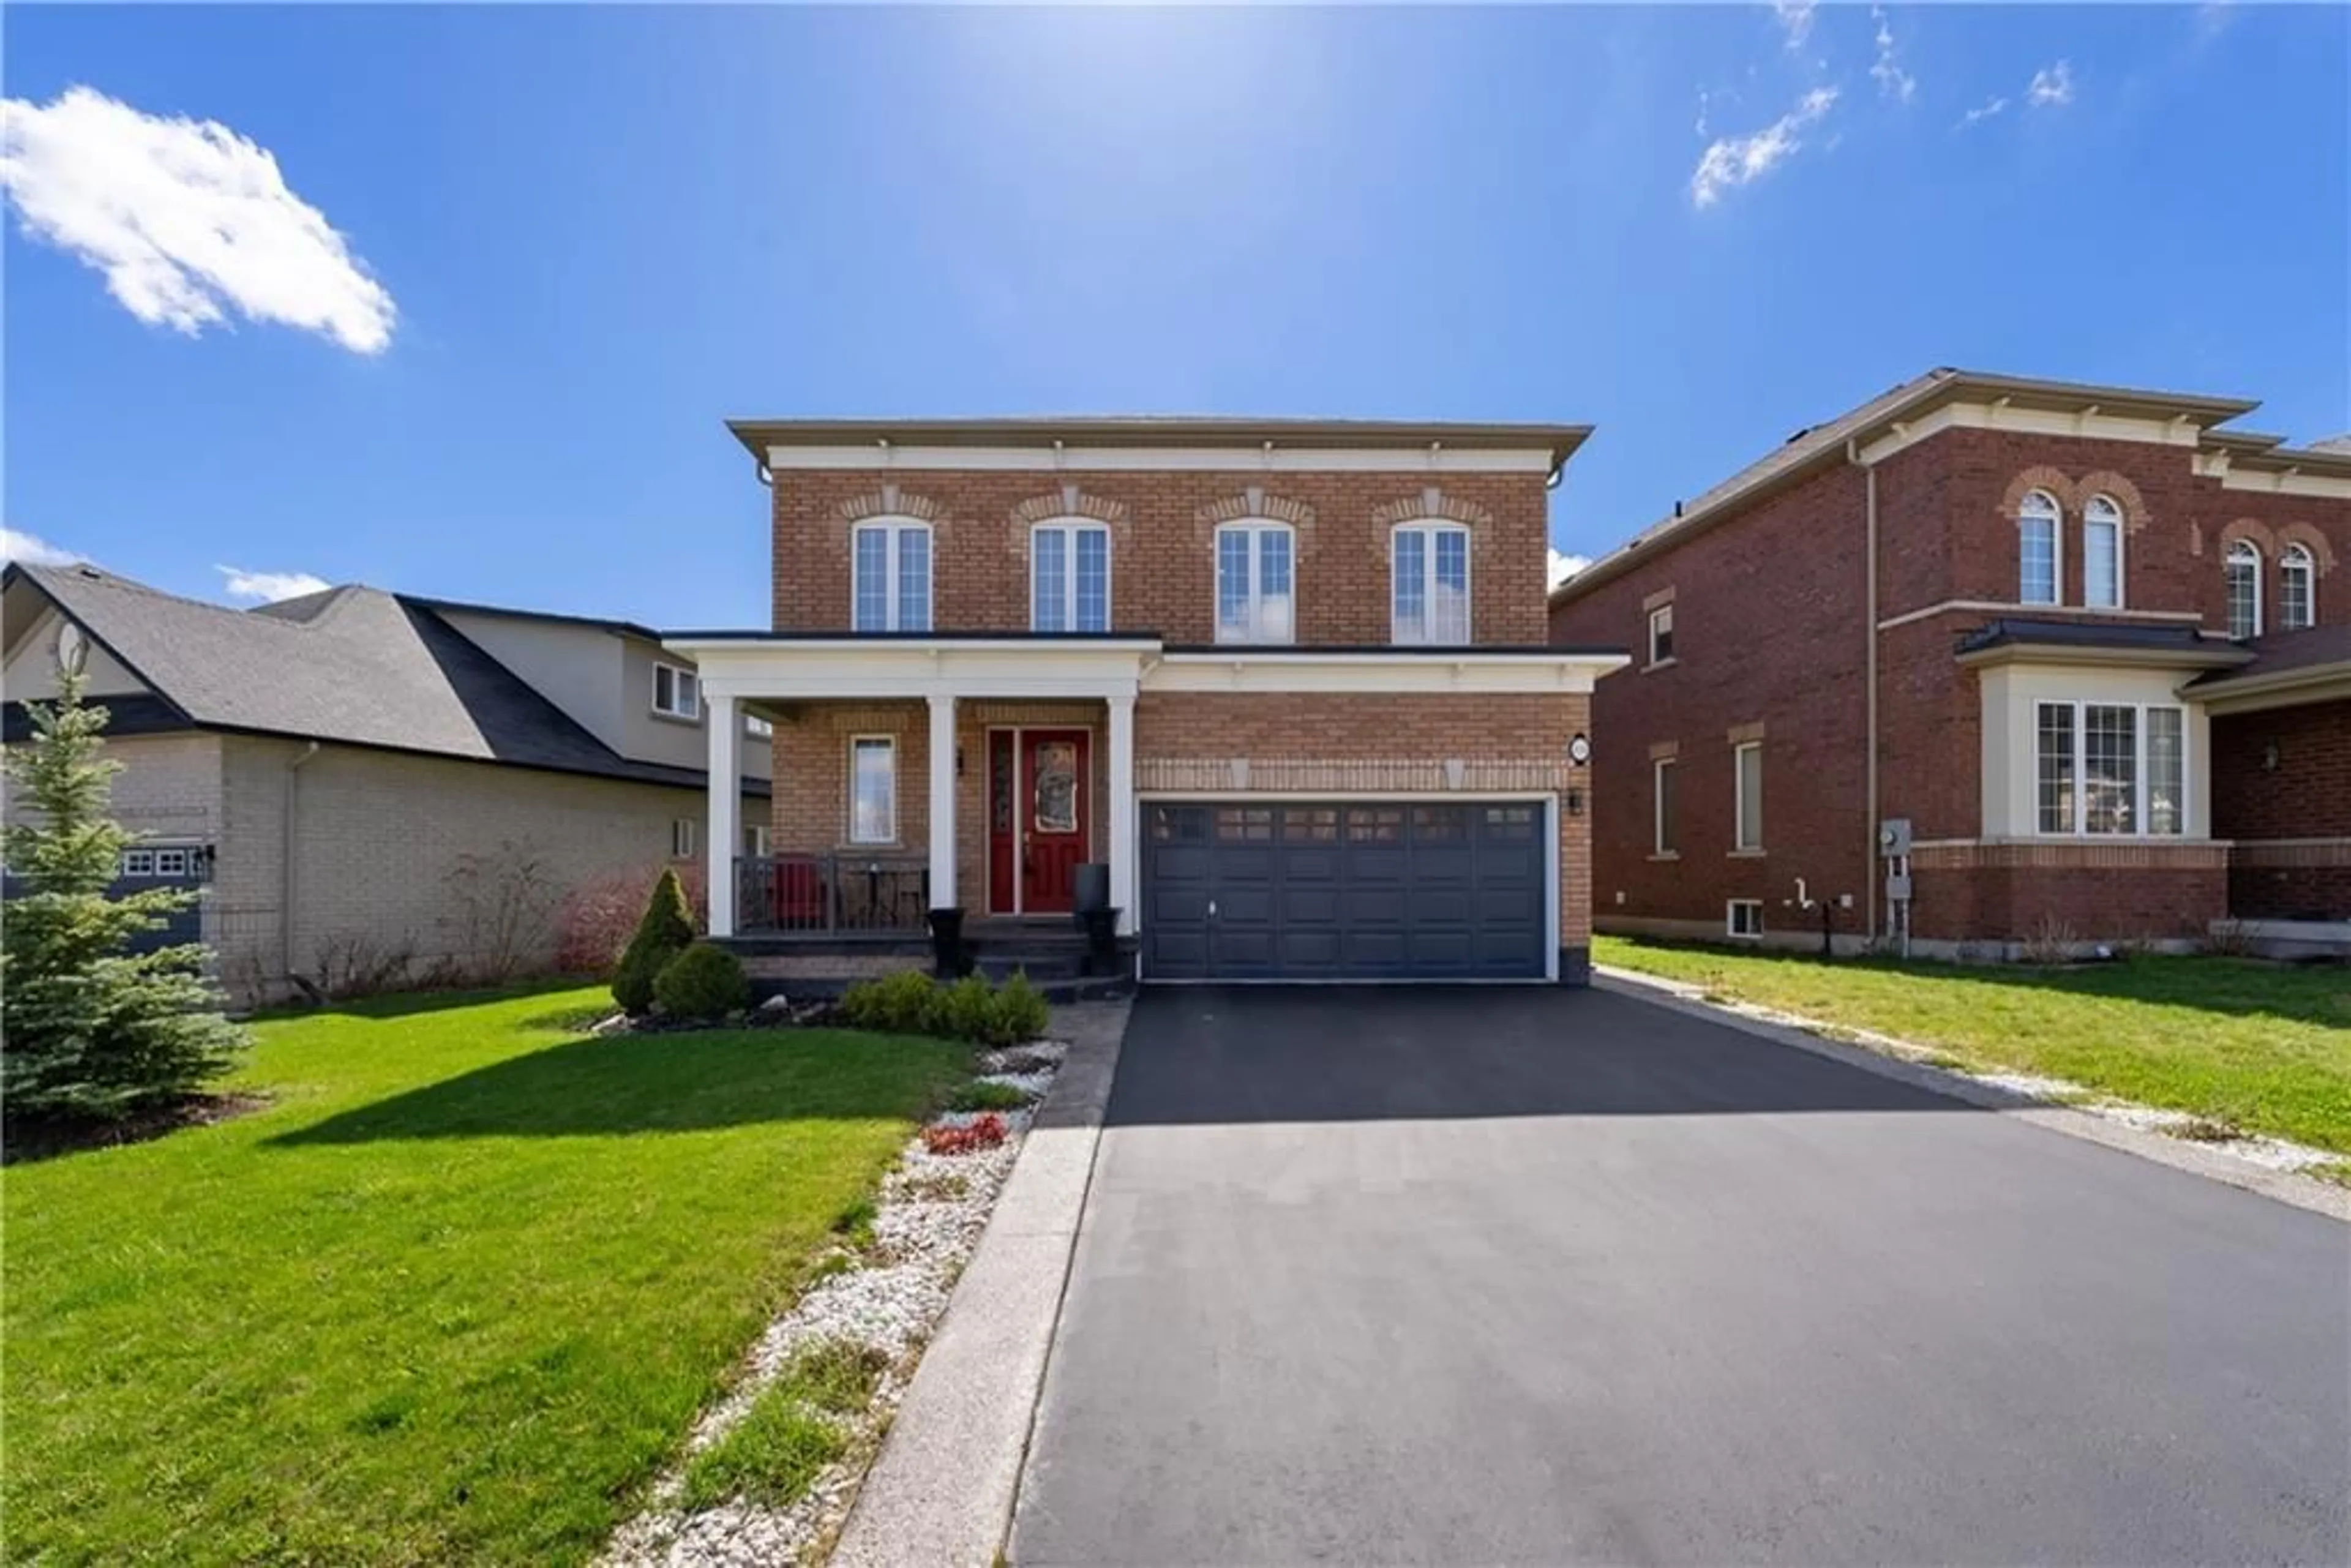 Home with brick exterior material for 132 SPRINGVIEW Dr, Waterdown Ontario L8B 0V9